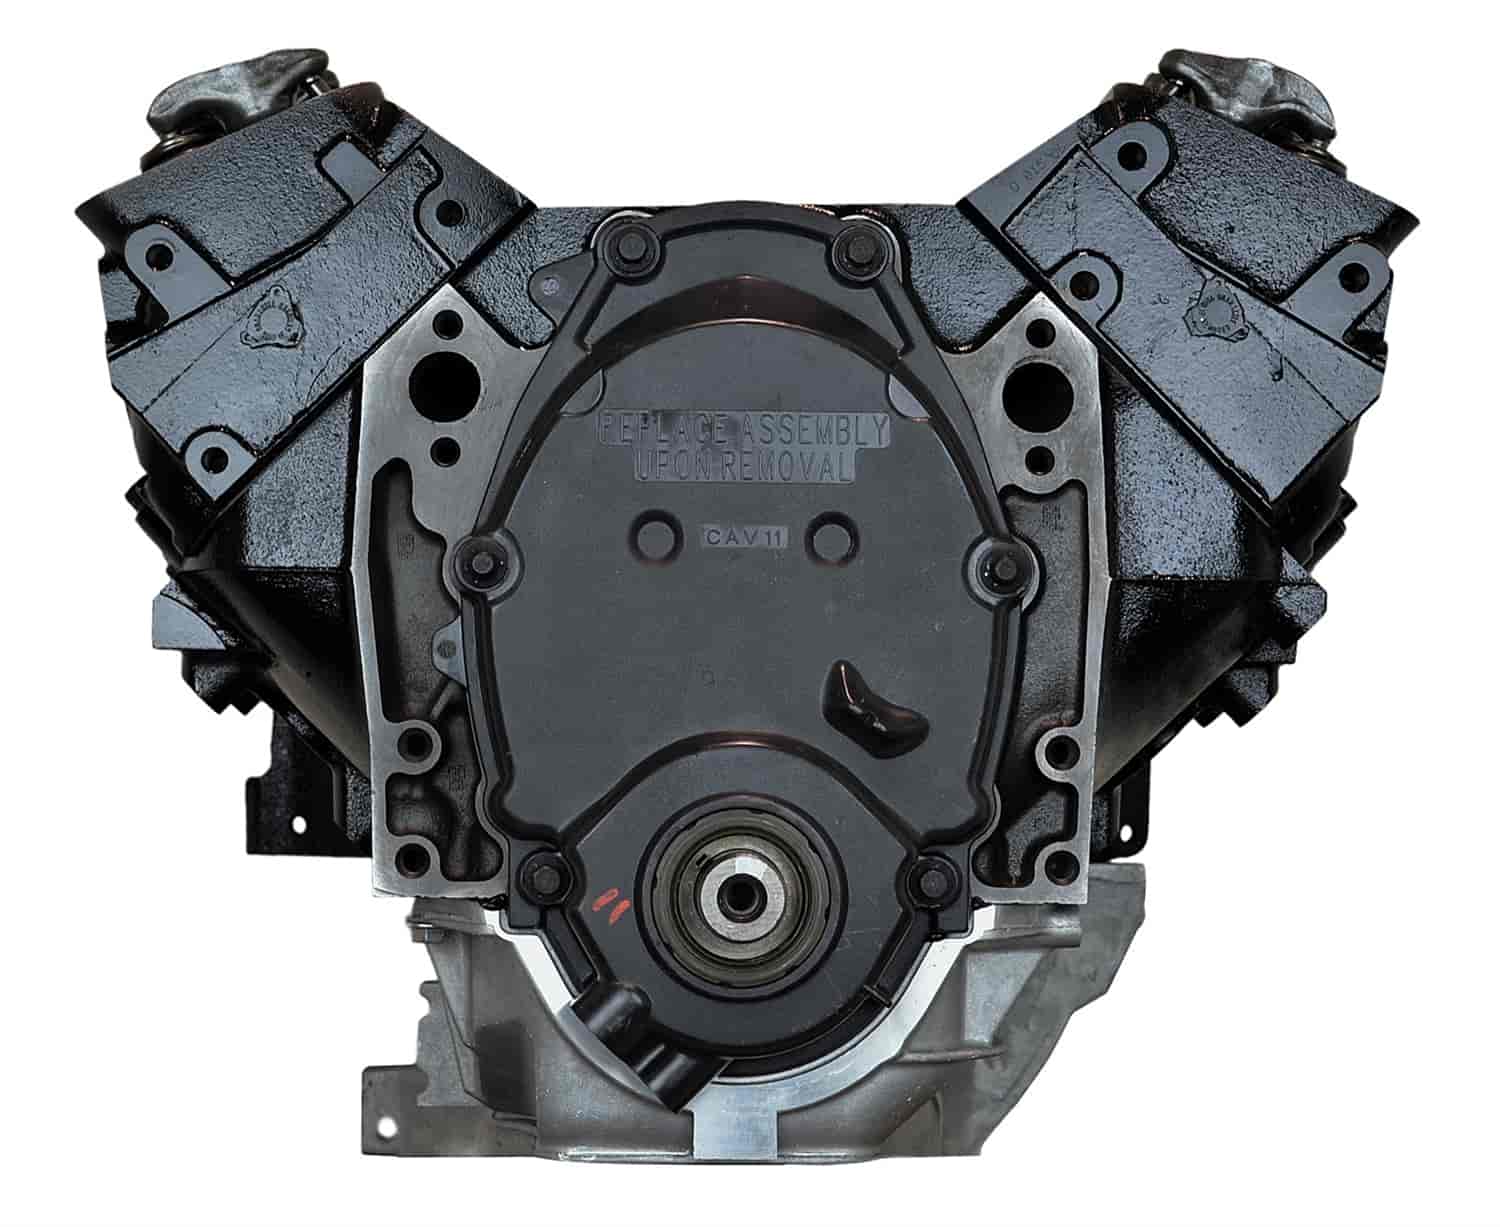 Remanufactured Crate Engine for 1998-1999 Chevy/GMC Truck, SUV, & Van with 4.3L V6